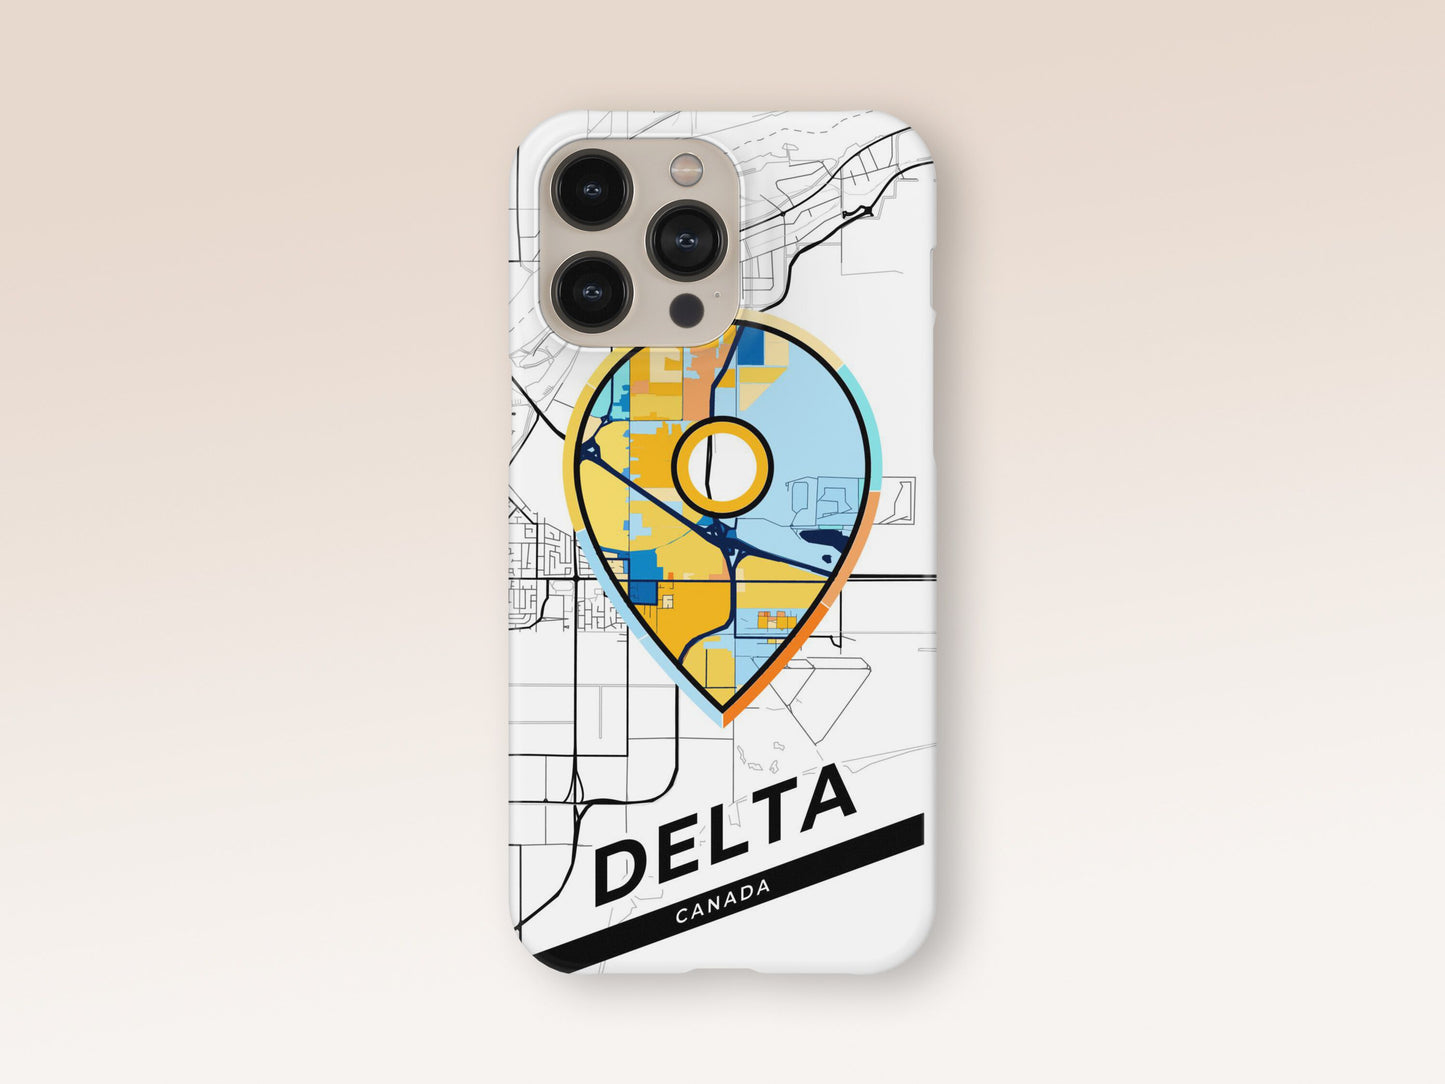 Delta Canada slim phone case with colorful icon. Birthday, wedding or housewarming gift. Couple match cases. 1